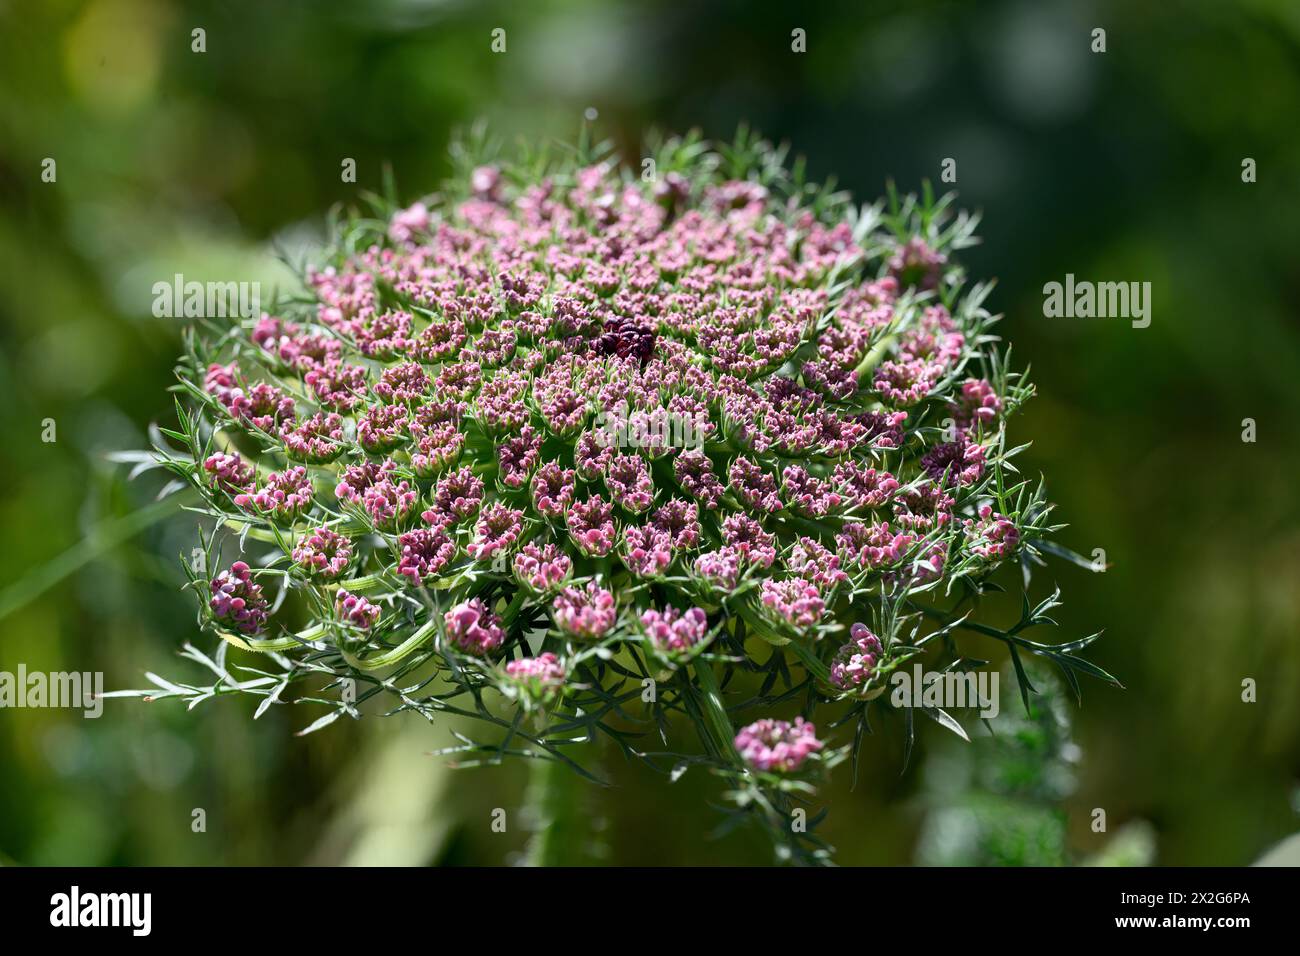 Daucus carota (common names include wild carrot, bird's nest, bishop's lace, and Queen Anne's lace). Photographed in the Lower Galilee, Israel in Marc Stock Photo